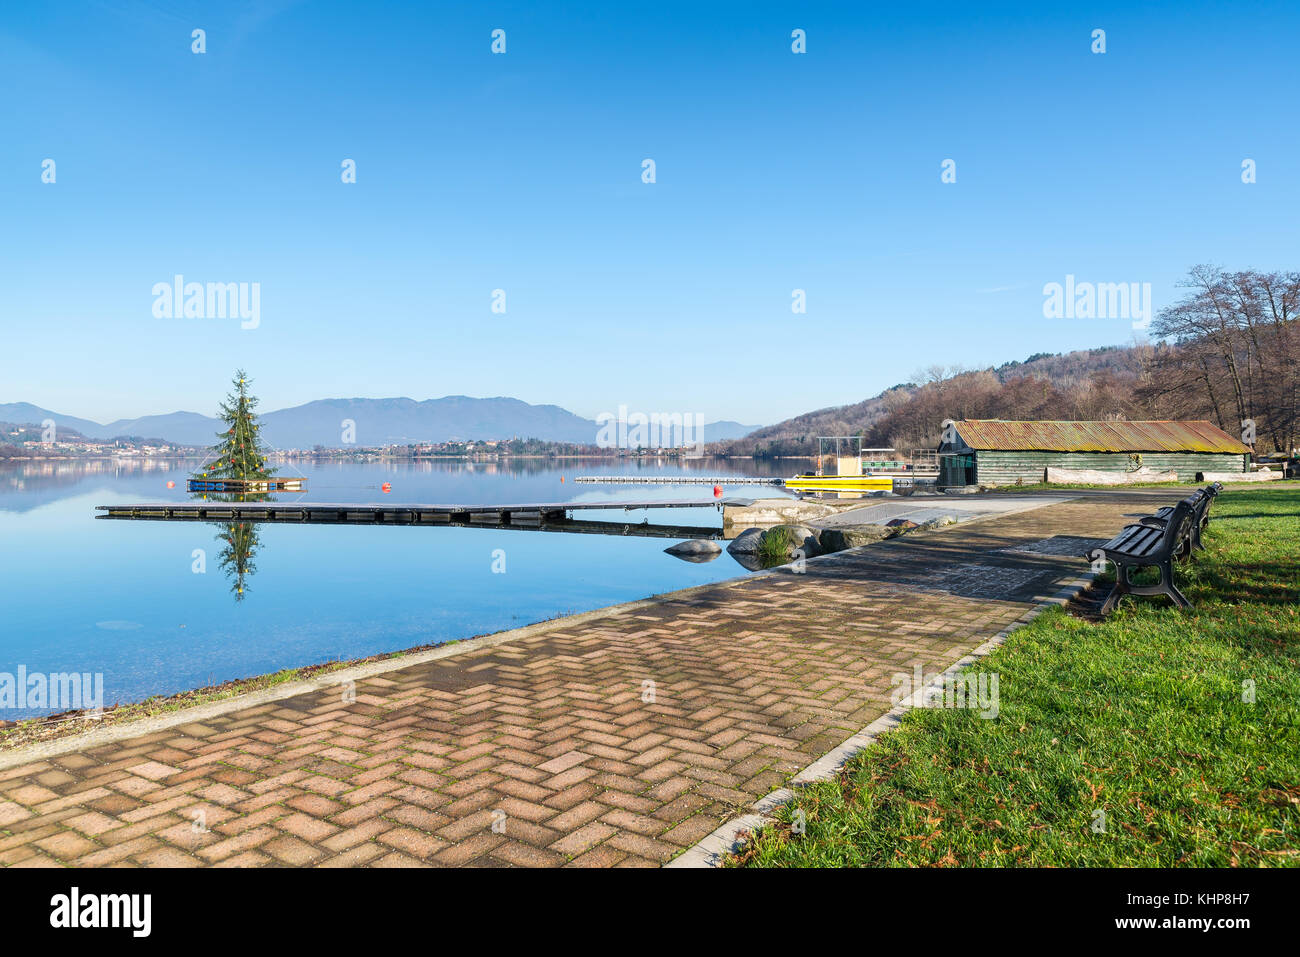 Corgeno town, Lake Comabbio, Italy. Panorama from the public park on the lakefront of Corgeno in winter. View towards Varano Borghi and Ternate Stock Photo